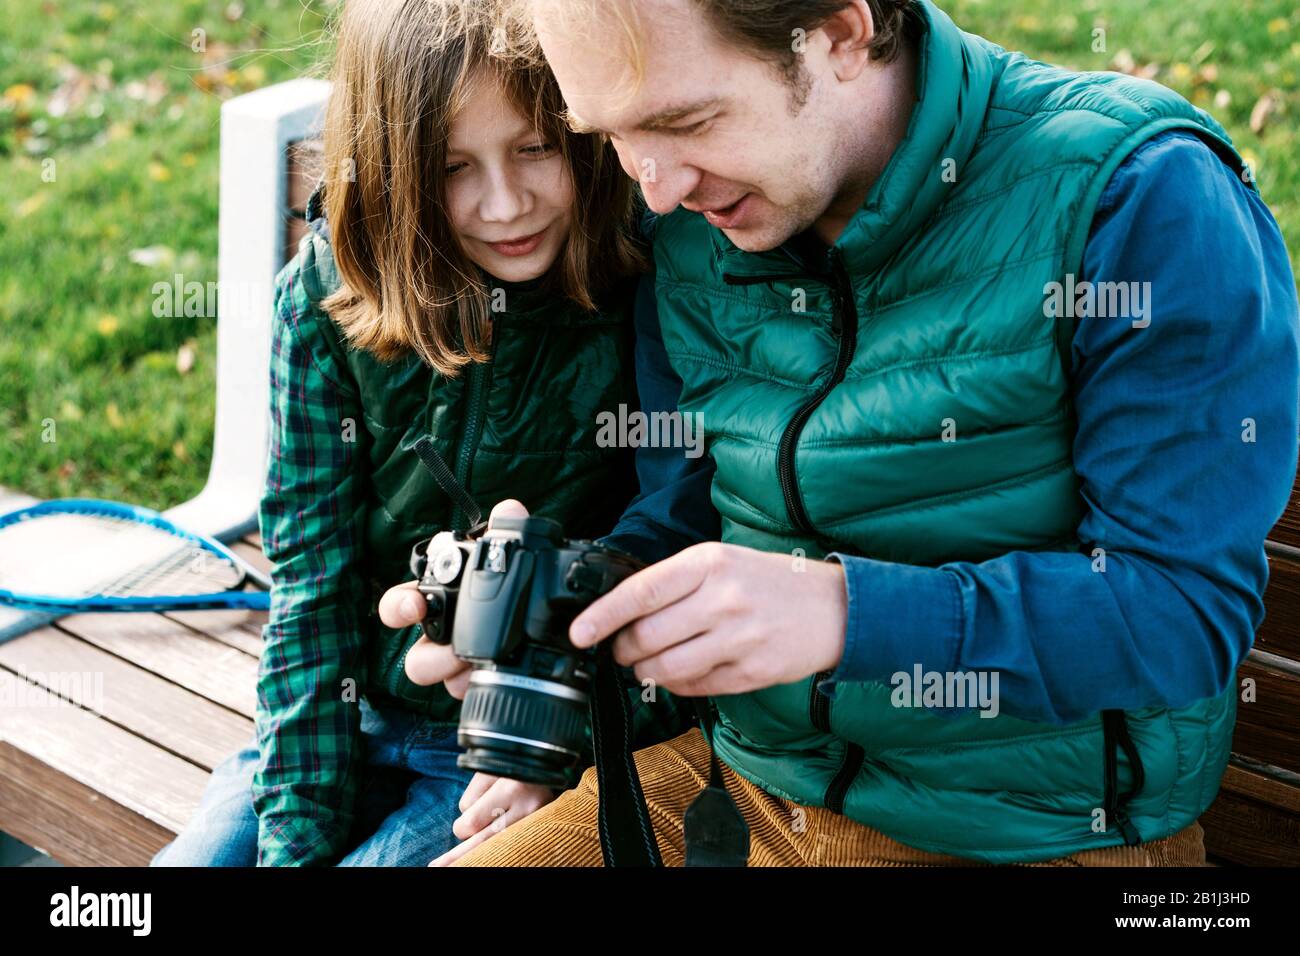 A father and son of school age with photo camera sitting on bench Stock Photo